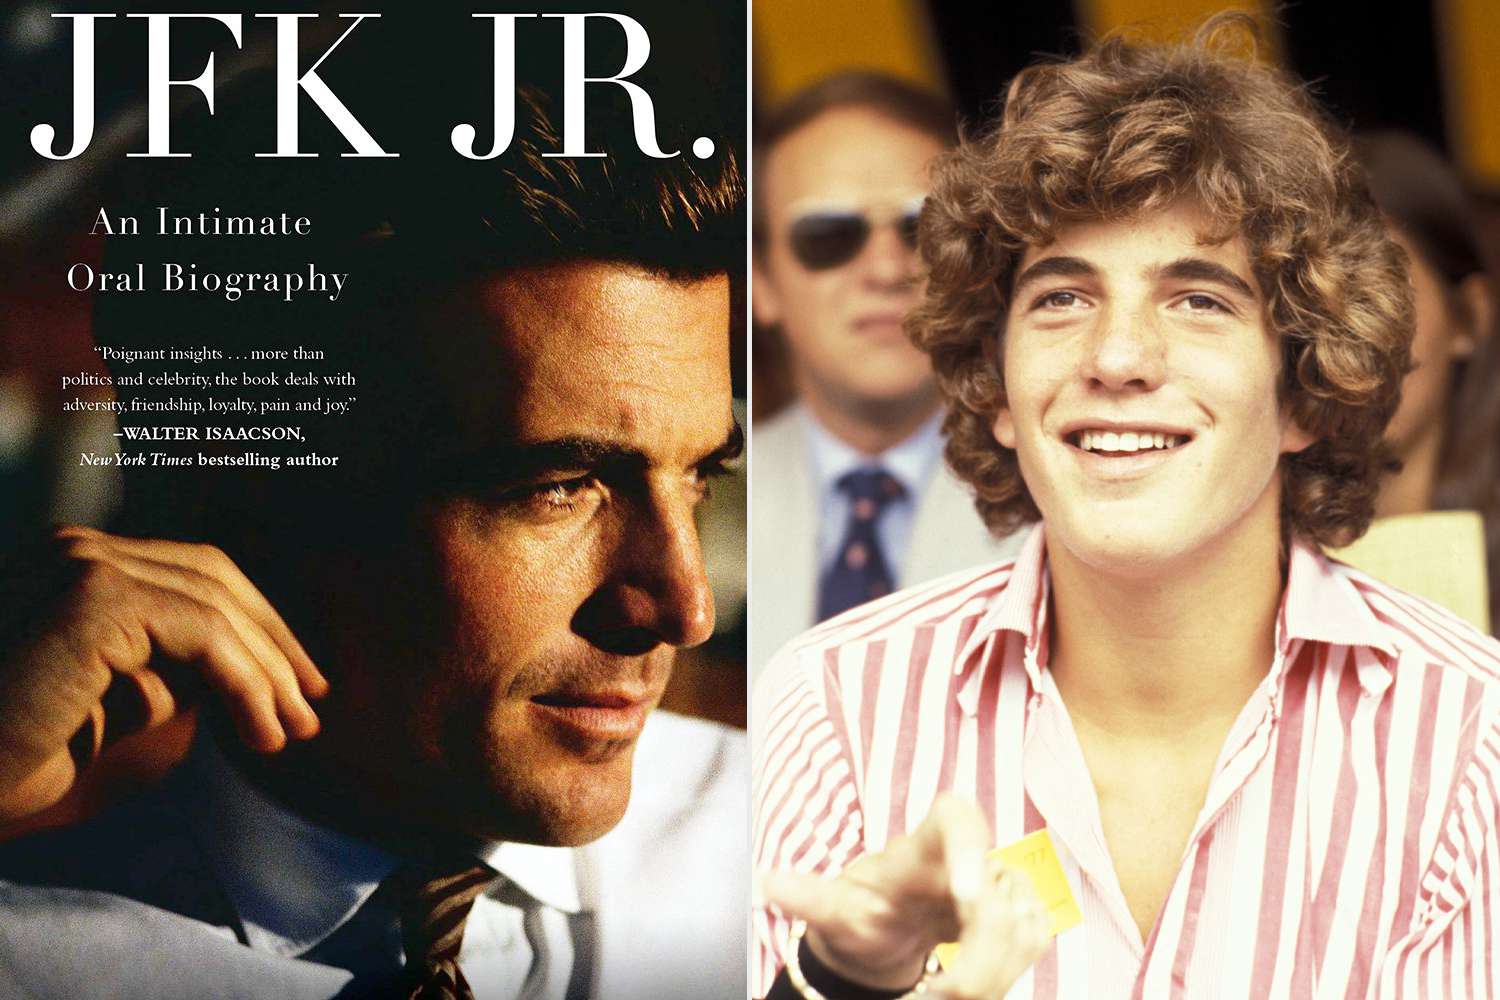 The Biggest Revelations from JFK Jr.'s Oral Biography: Naked Female Visitors, Smoking Weed Daily and more